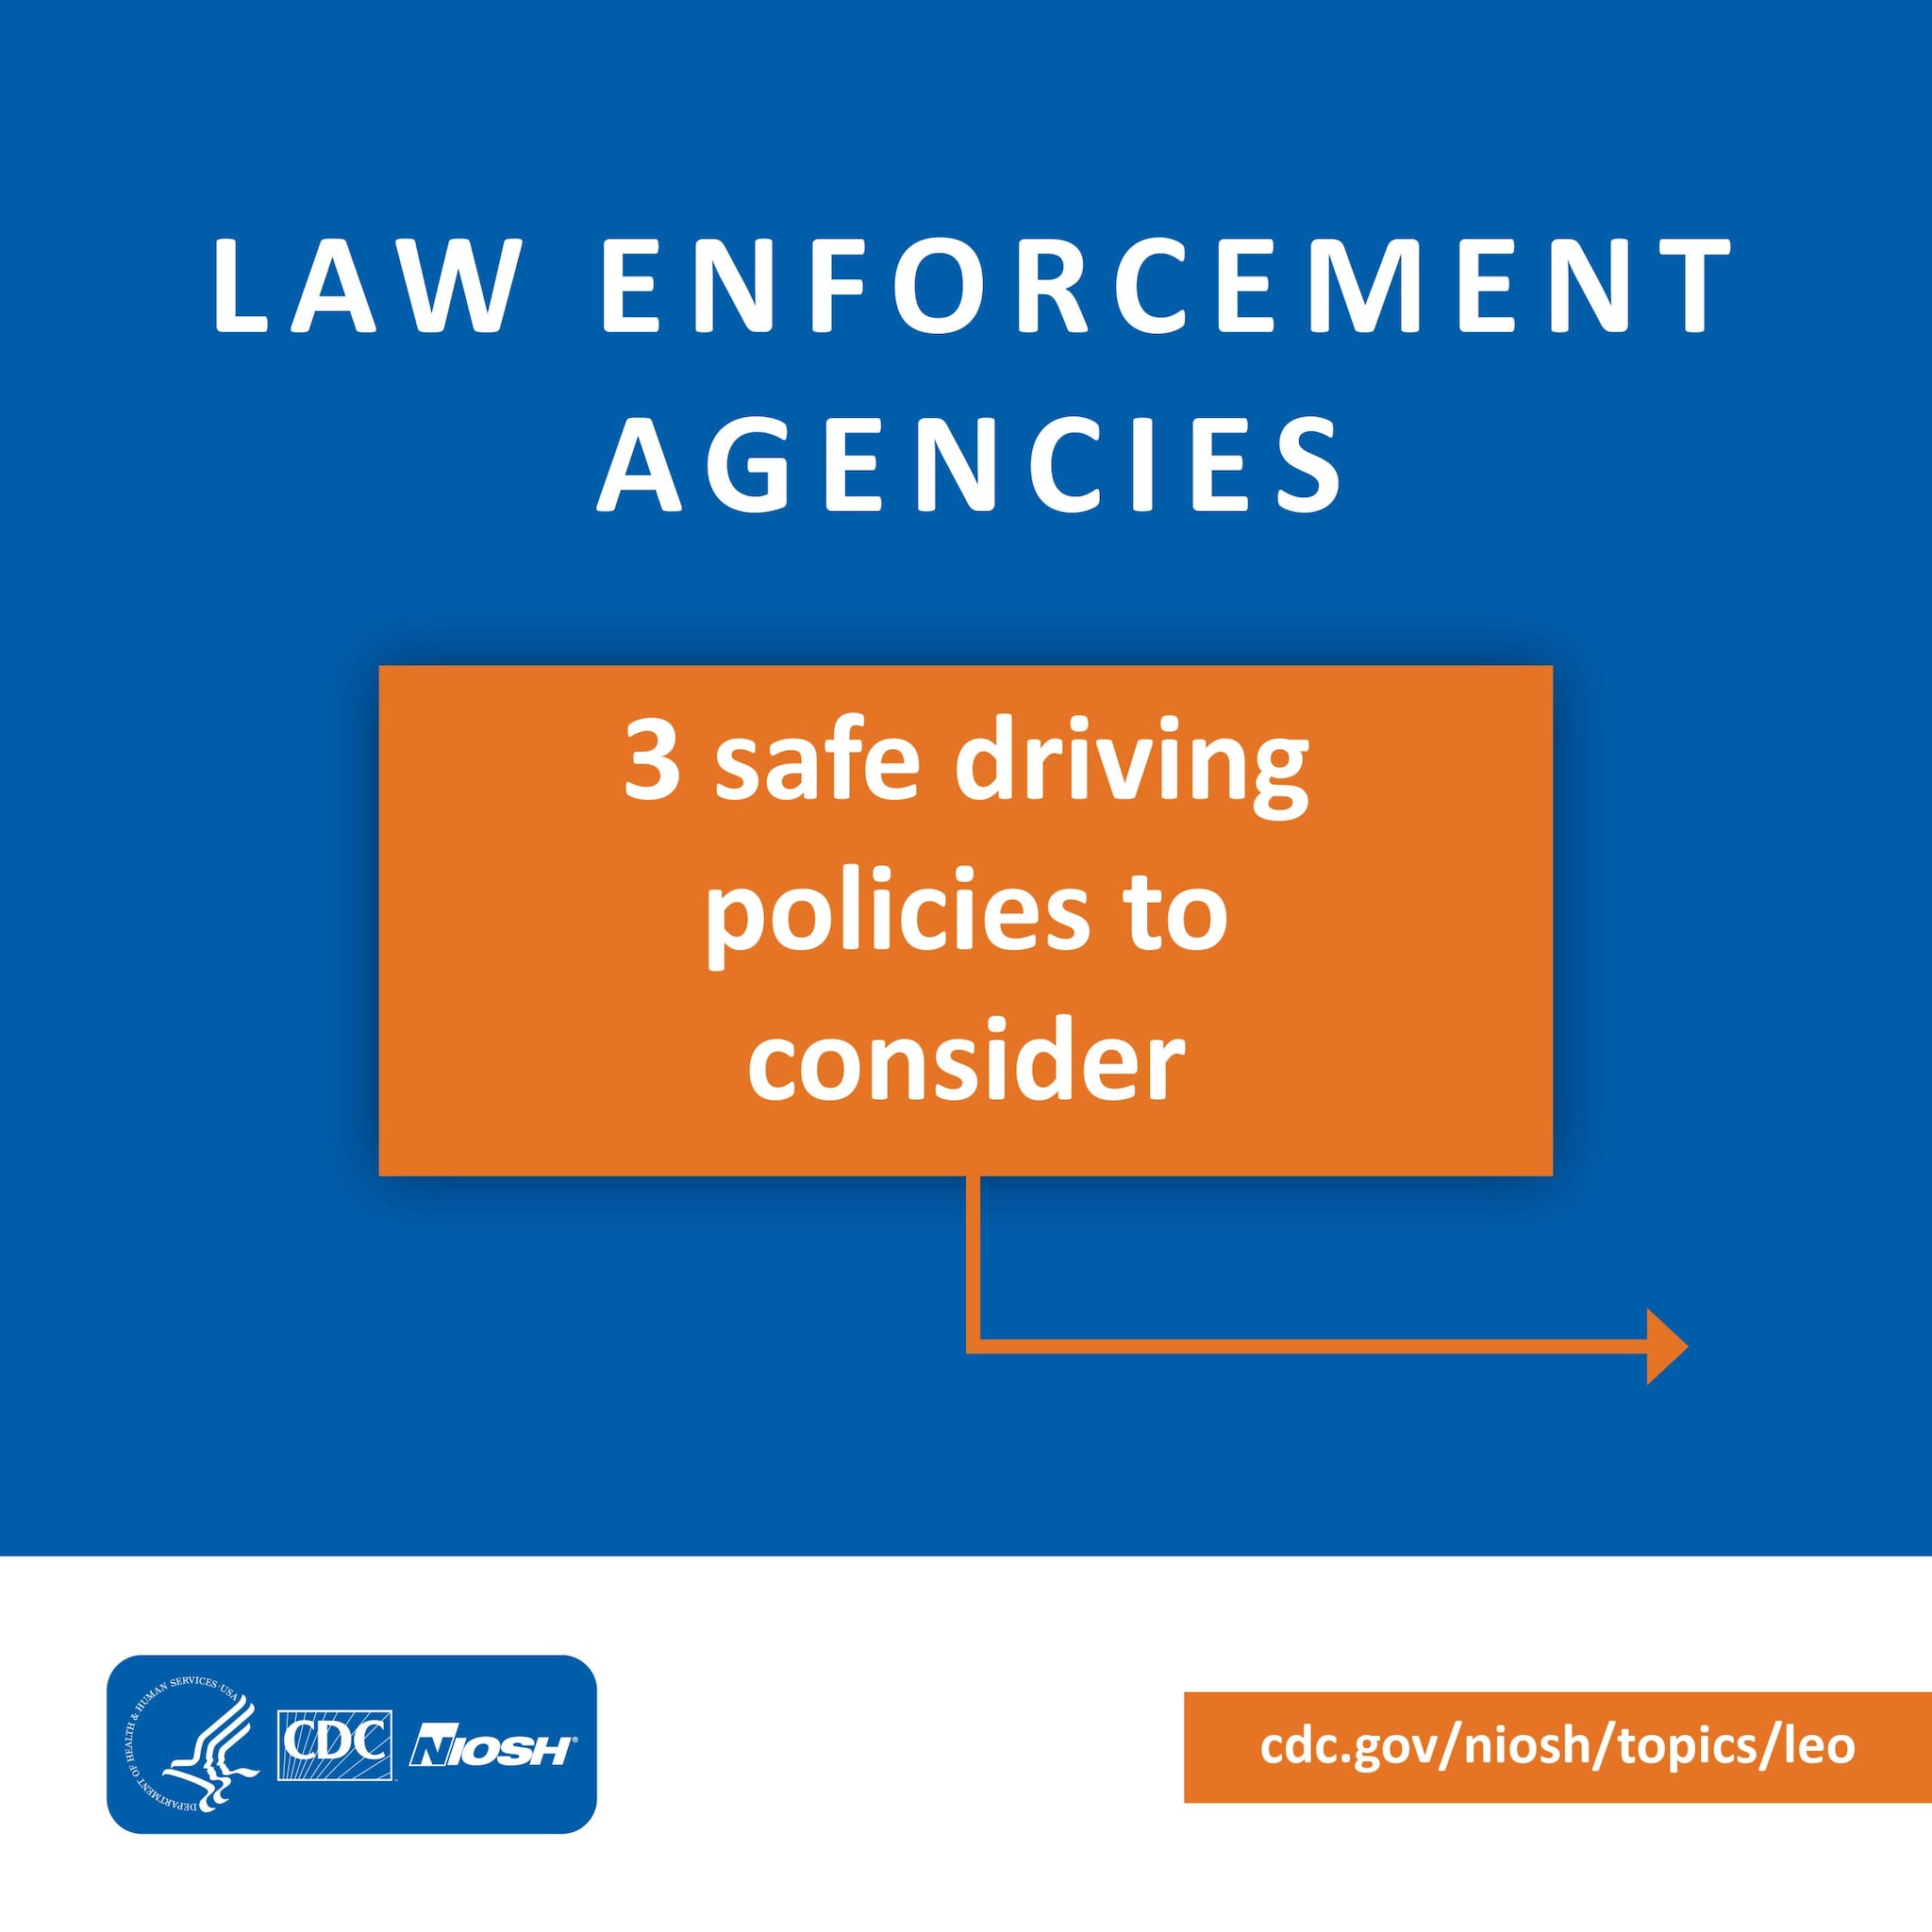 Law Enforcement Agencies: 3 safe driving policies to consider